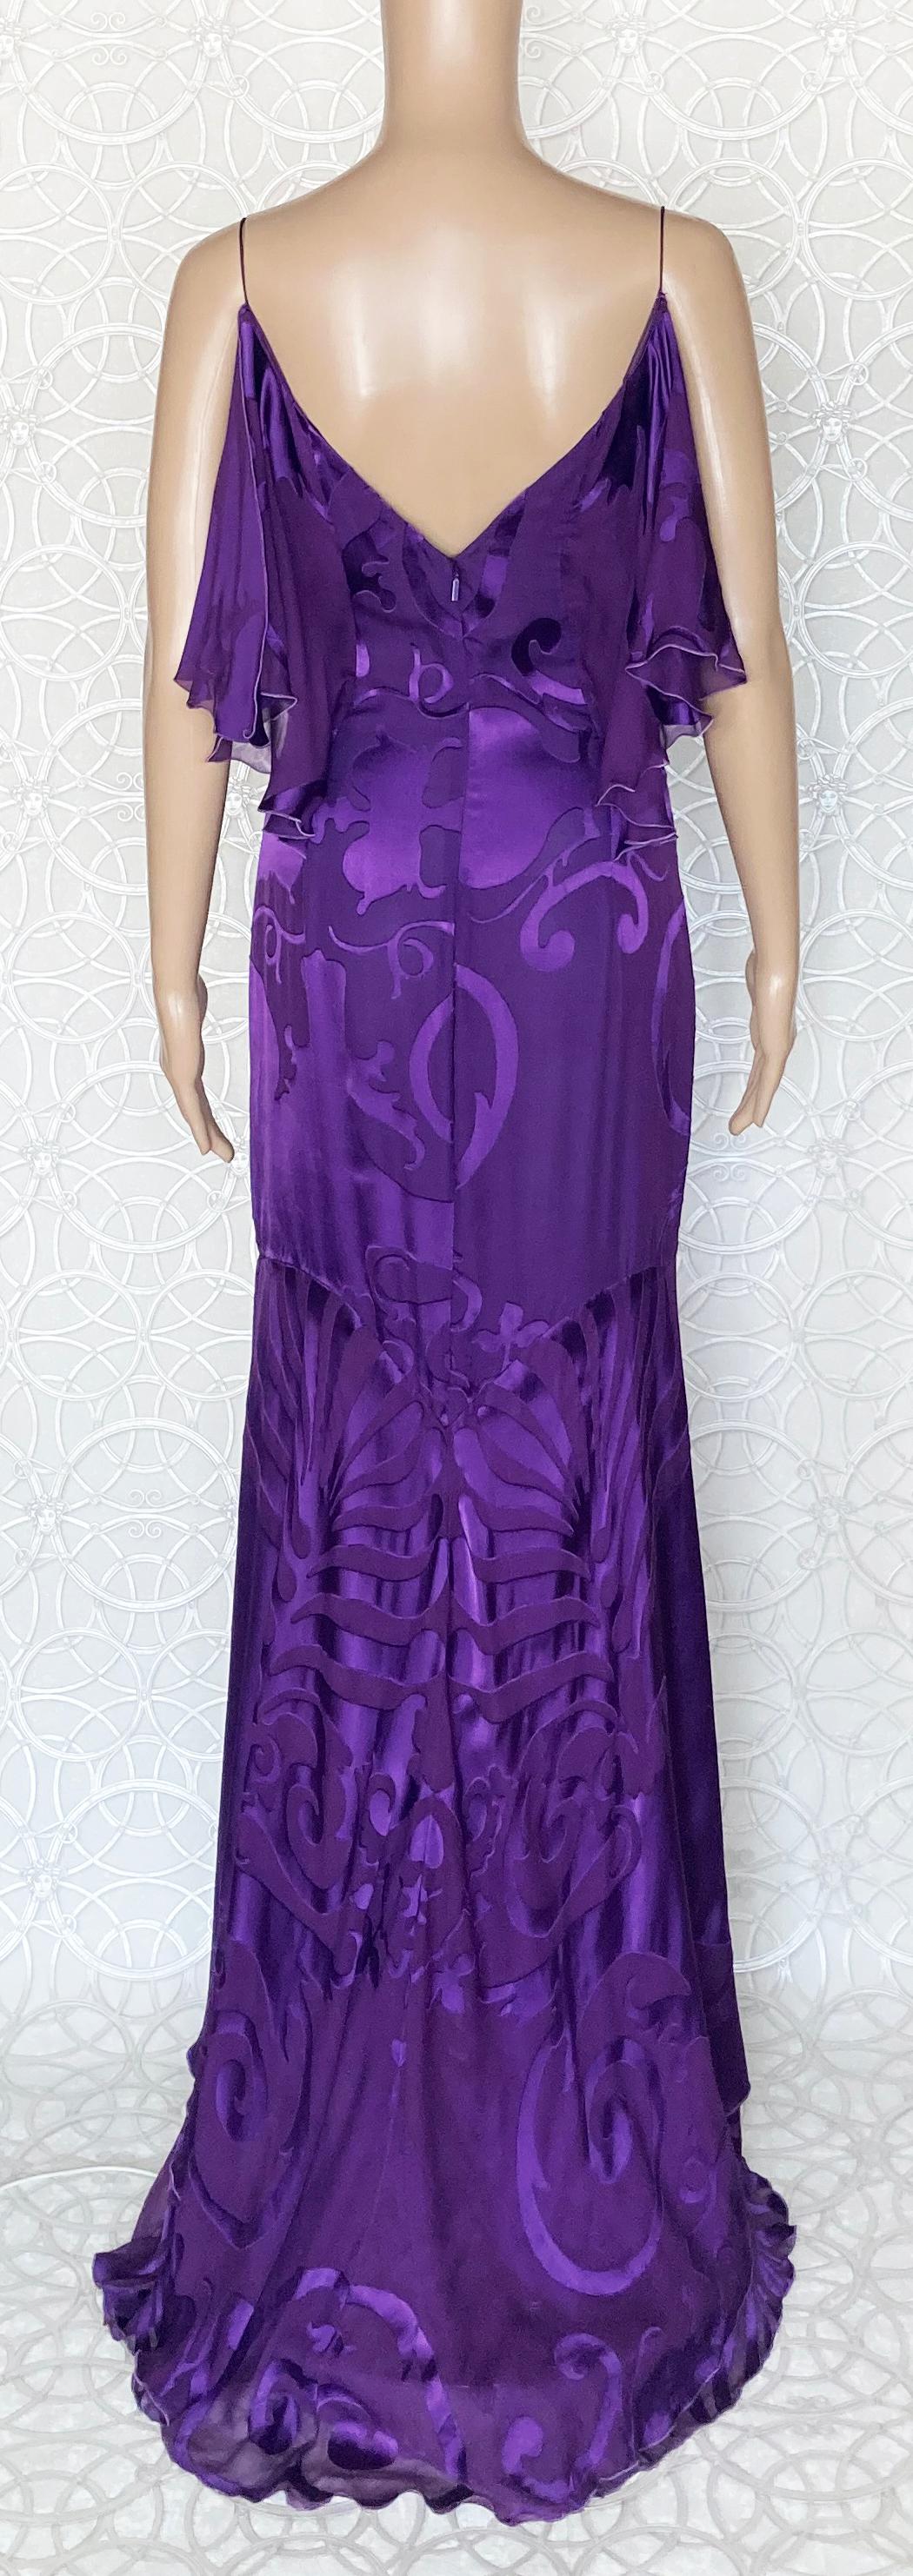 Pre-FALL 2011 Look # 5 VERSACE PURPLE FLORAL GOWN DRESS 38 - 2 For Sale 1